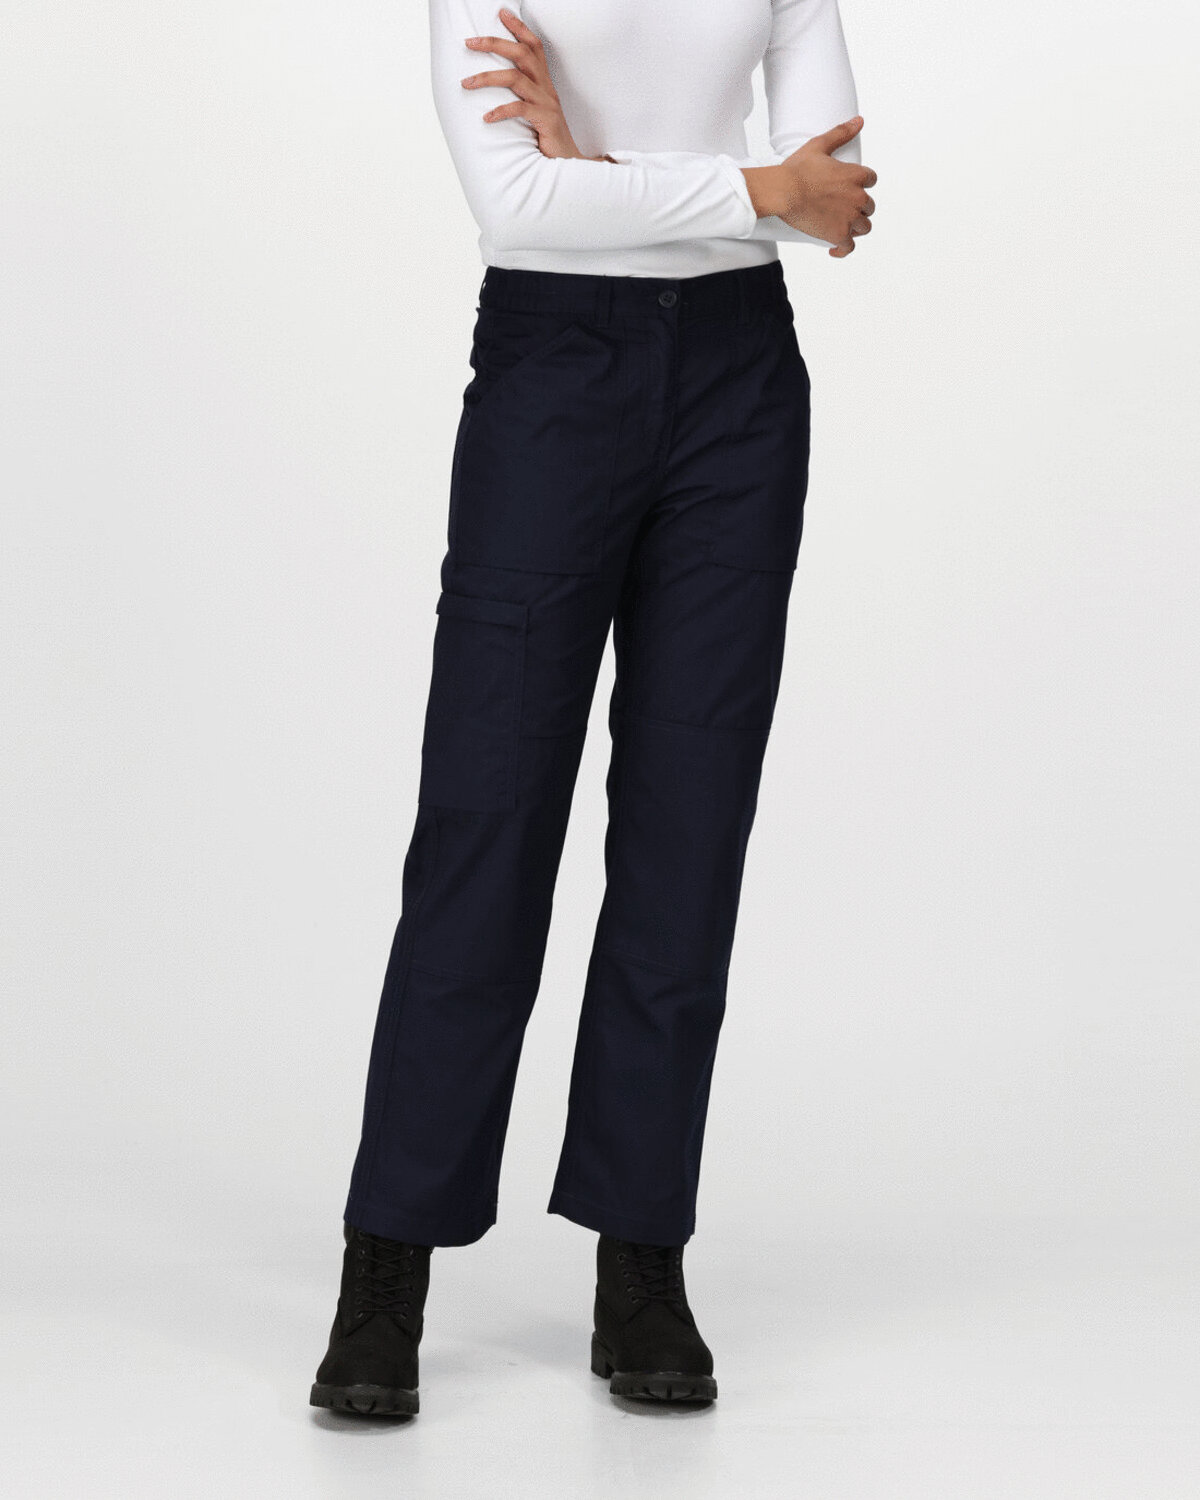 RG235M-NEW LADIES ACTION TROUSERS